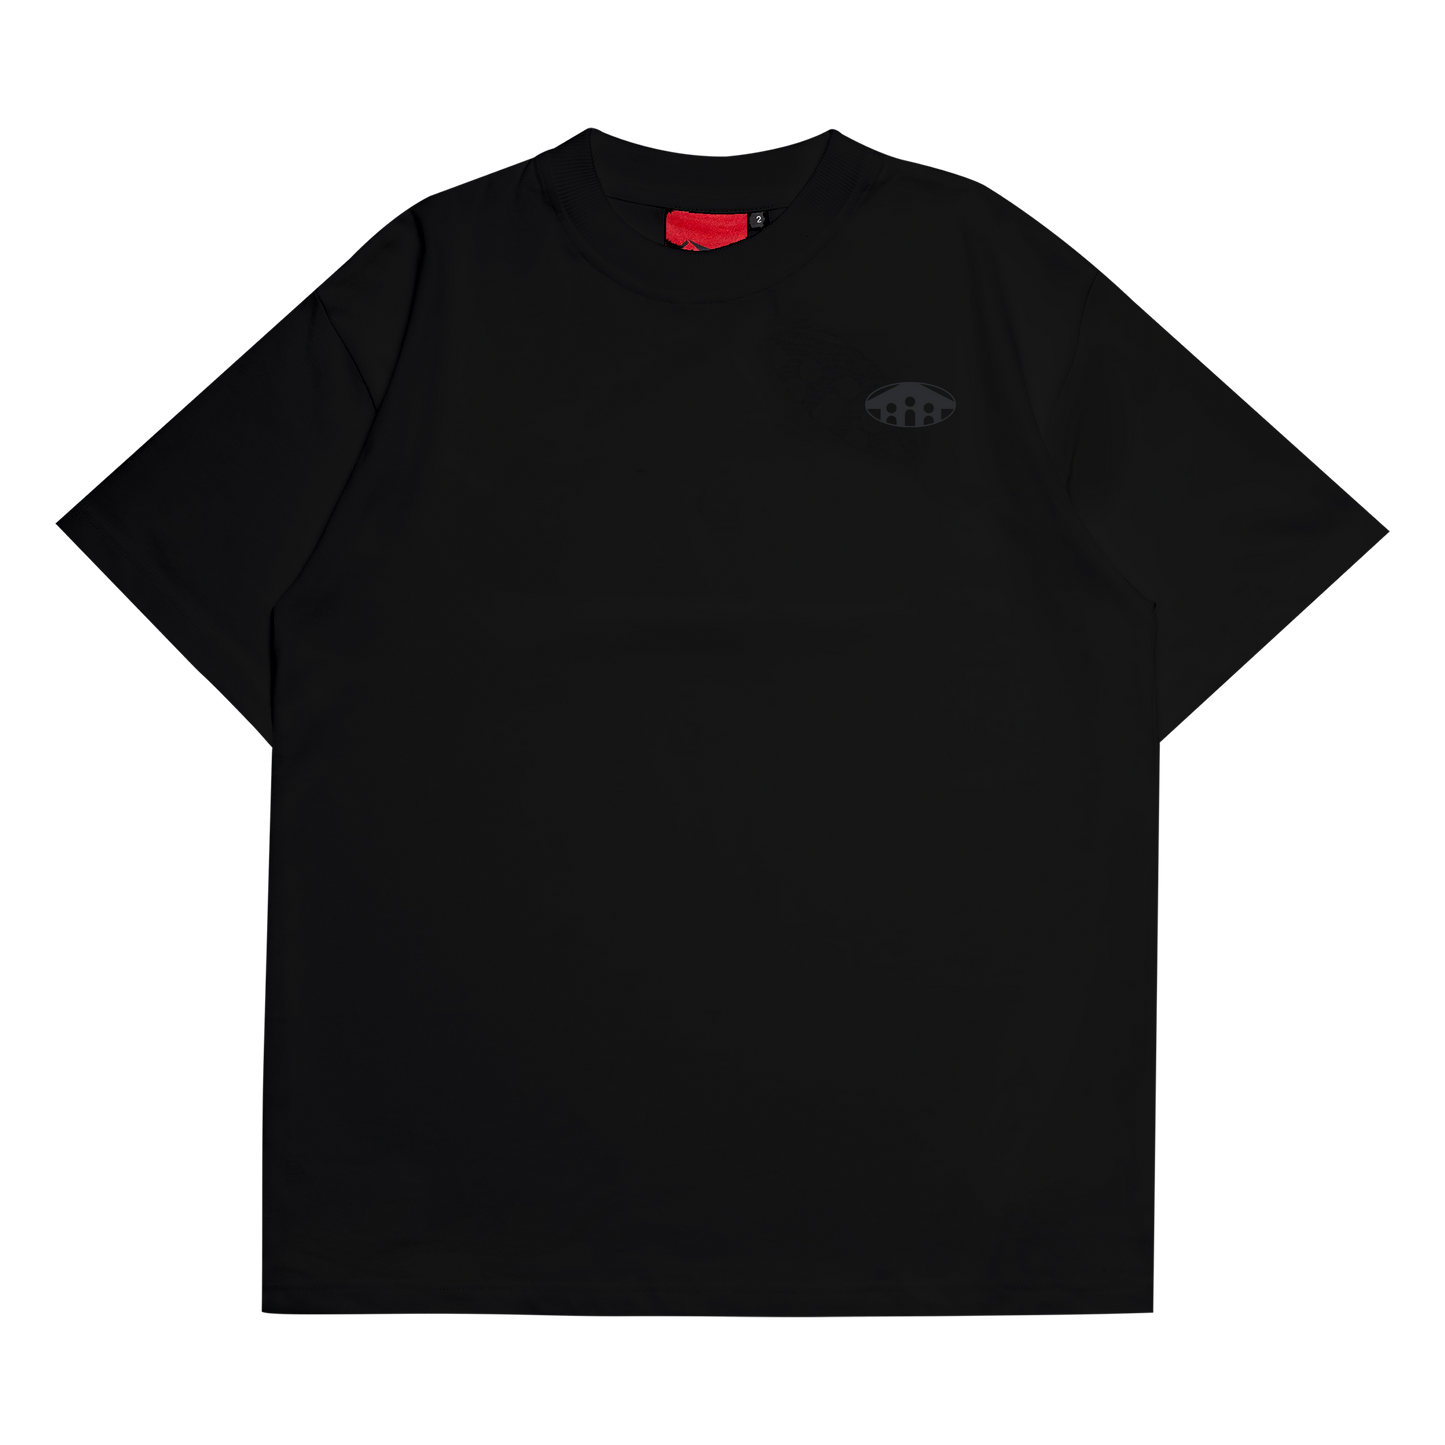 OVAL LOGO EMBROIDERED TEE